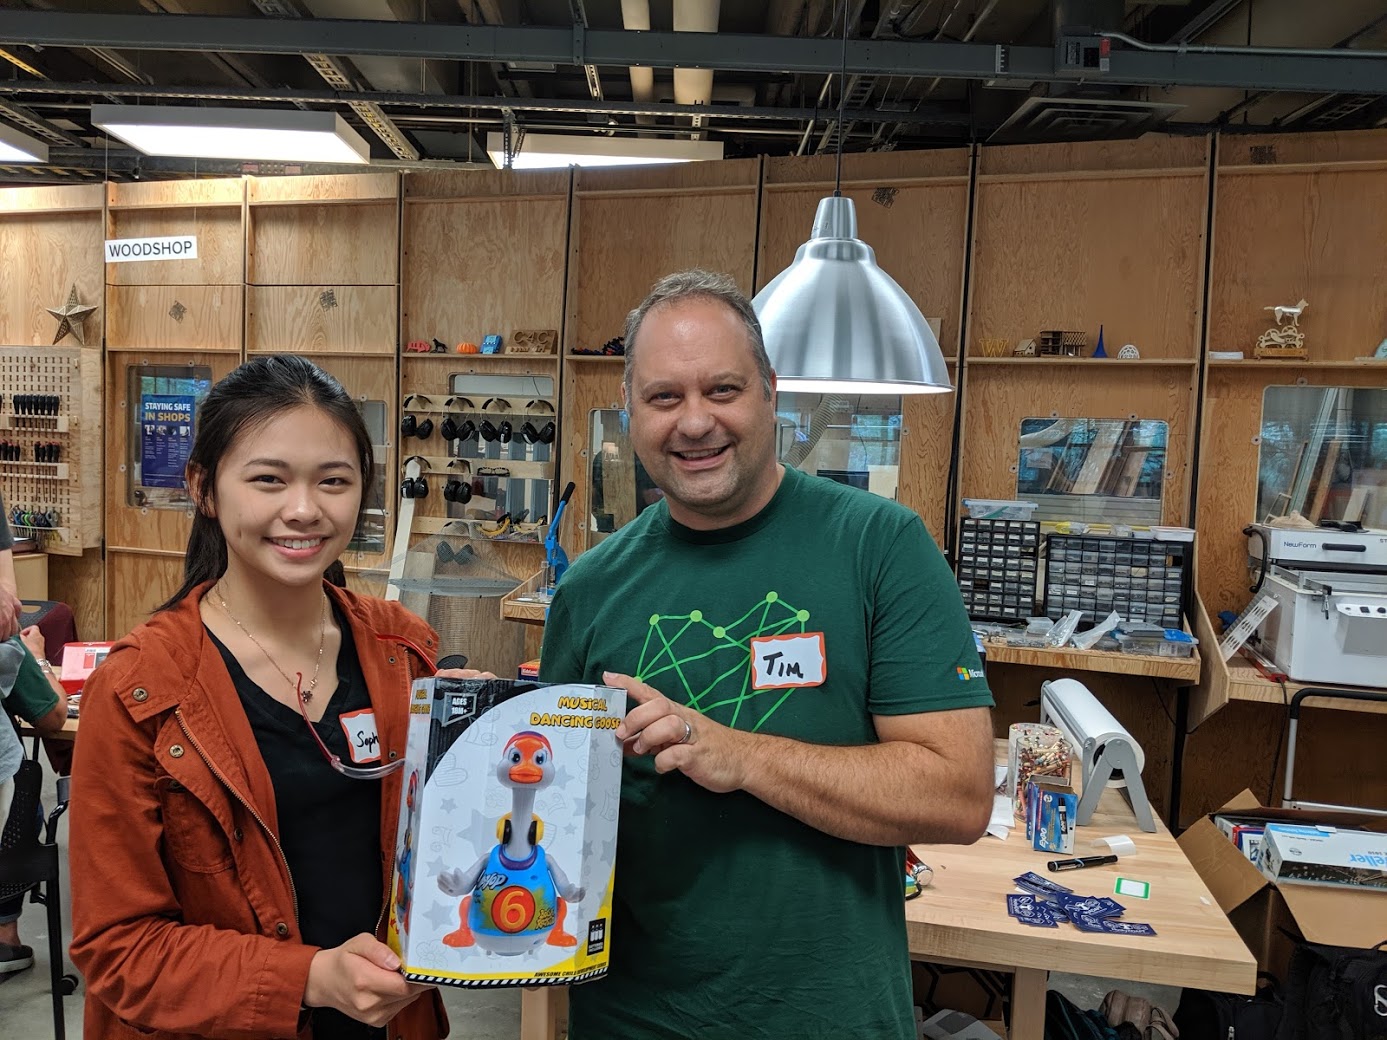 A woman wearing a orange jackets and black shirt and a man wearing a green shirt smiling while holding a toy in front of a workshop